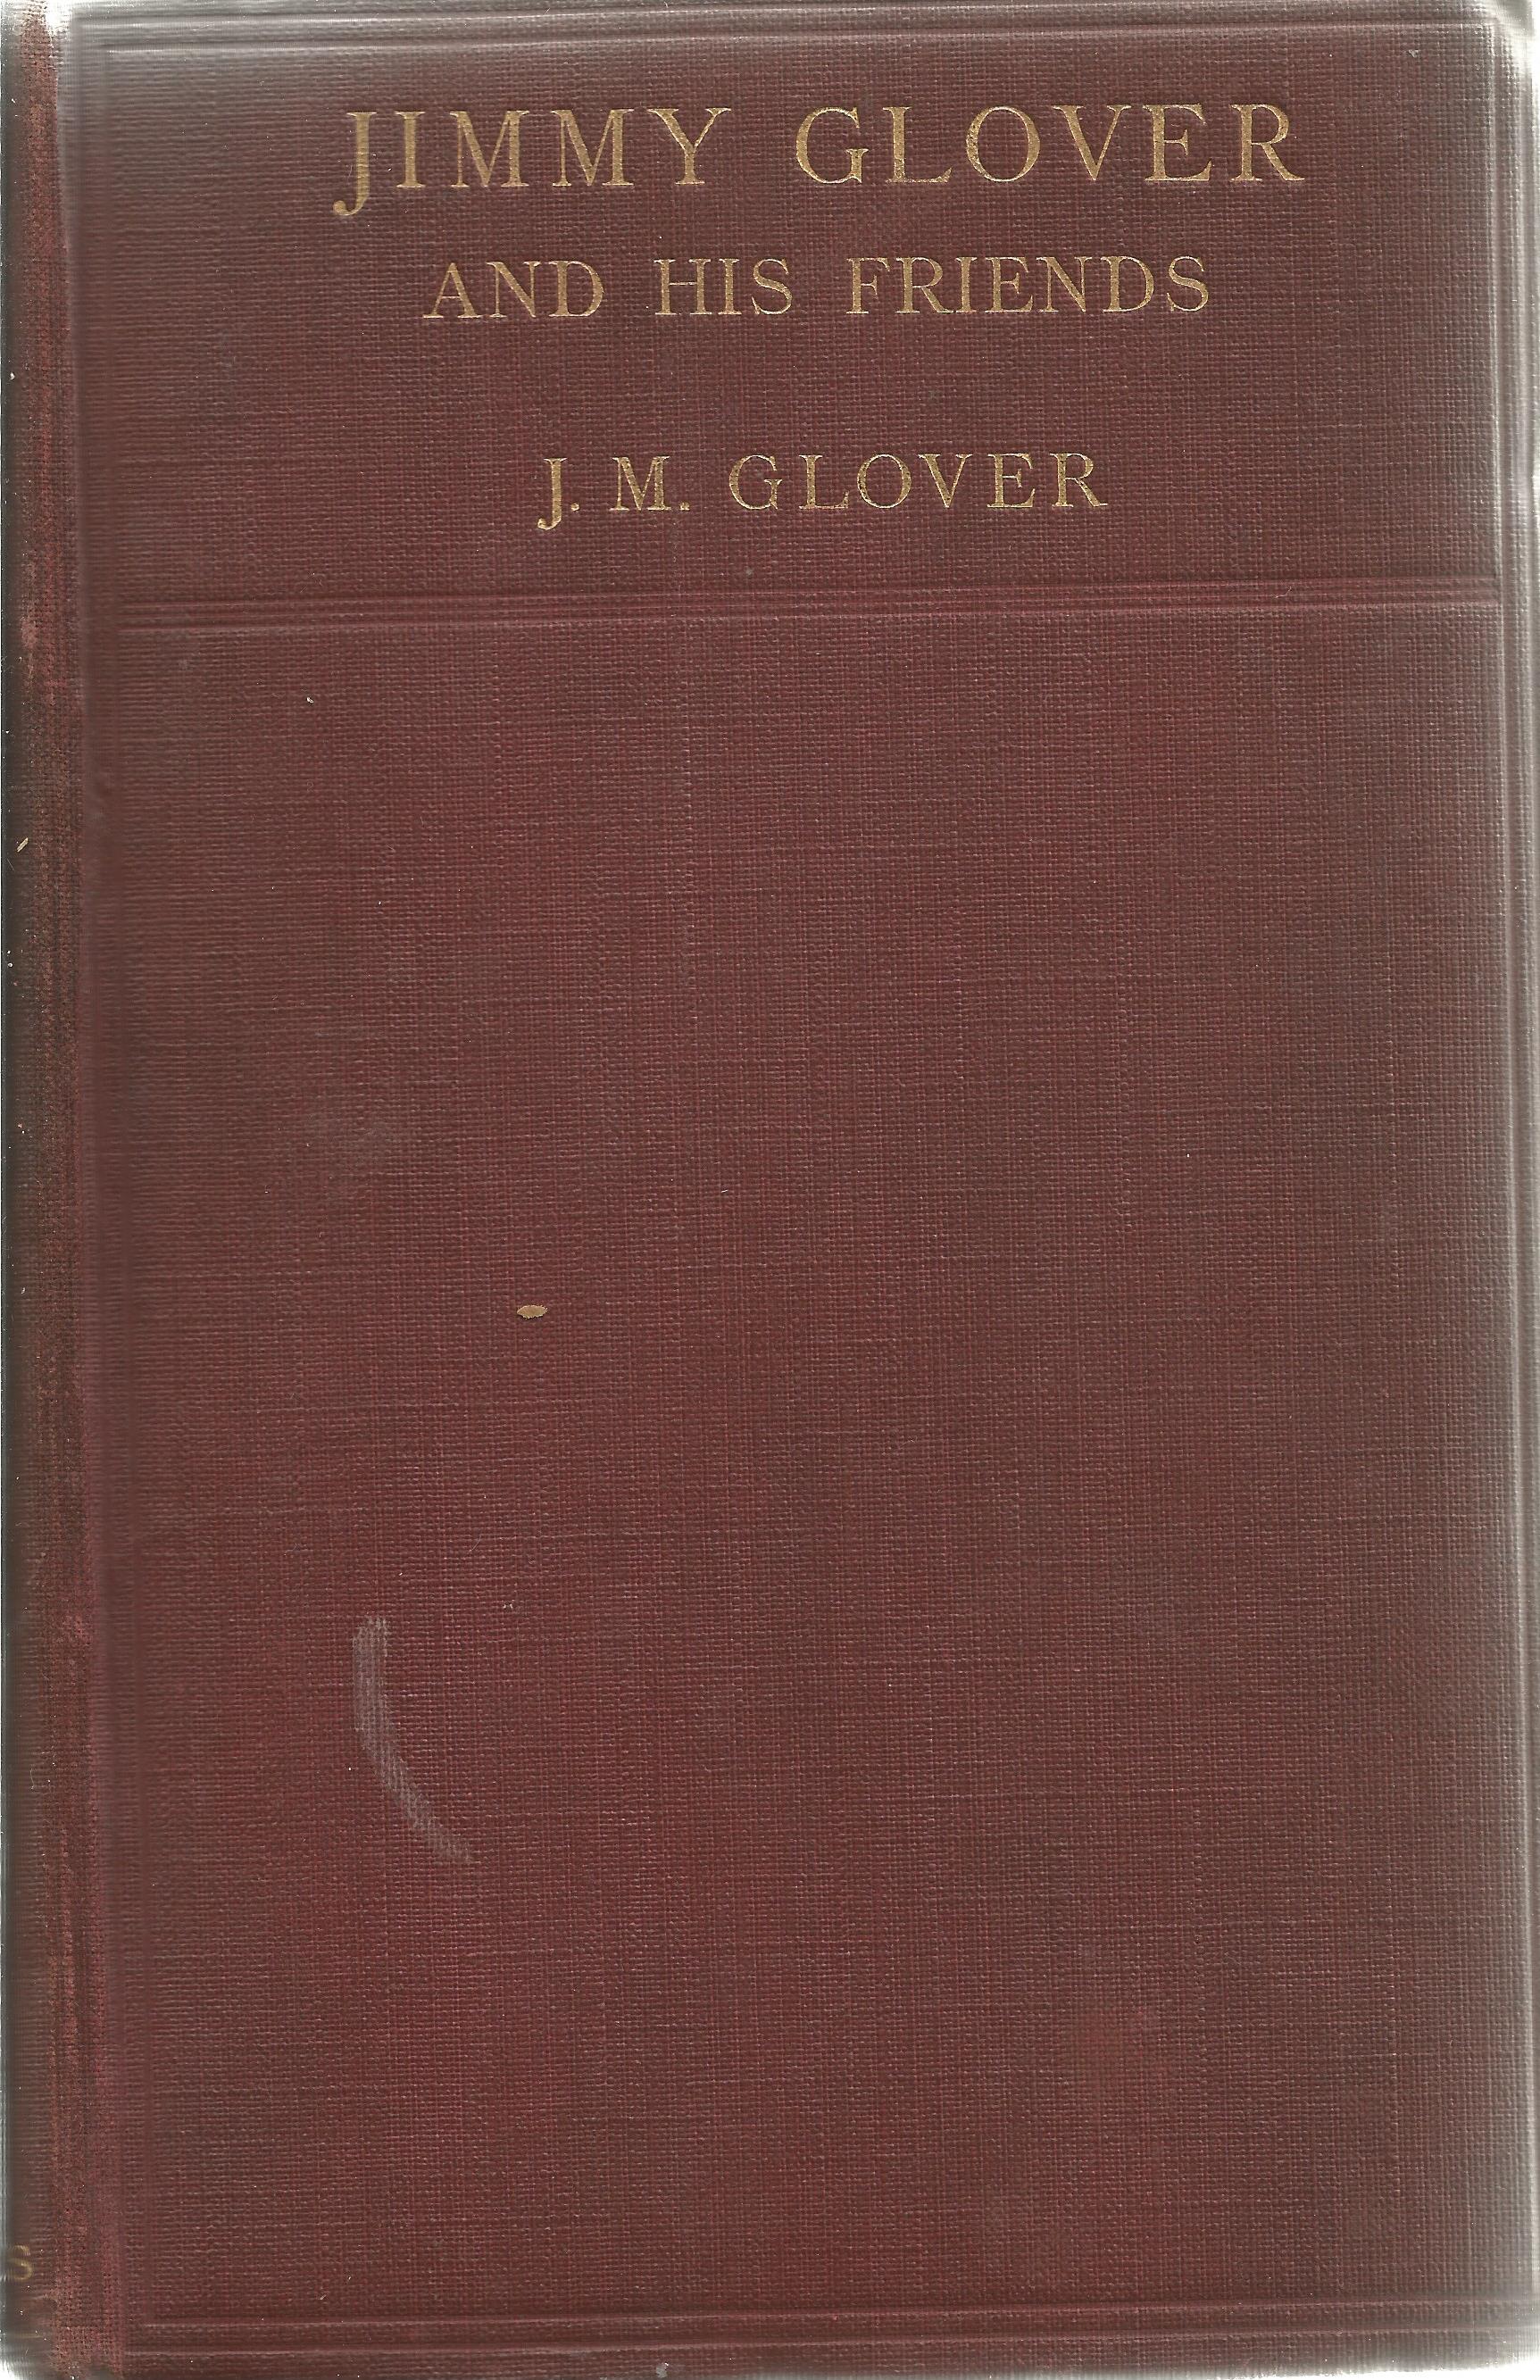 Jimmy Glover signed hard back book Jimmy Glover and his friends. No dust jacket, signed inside in